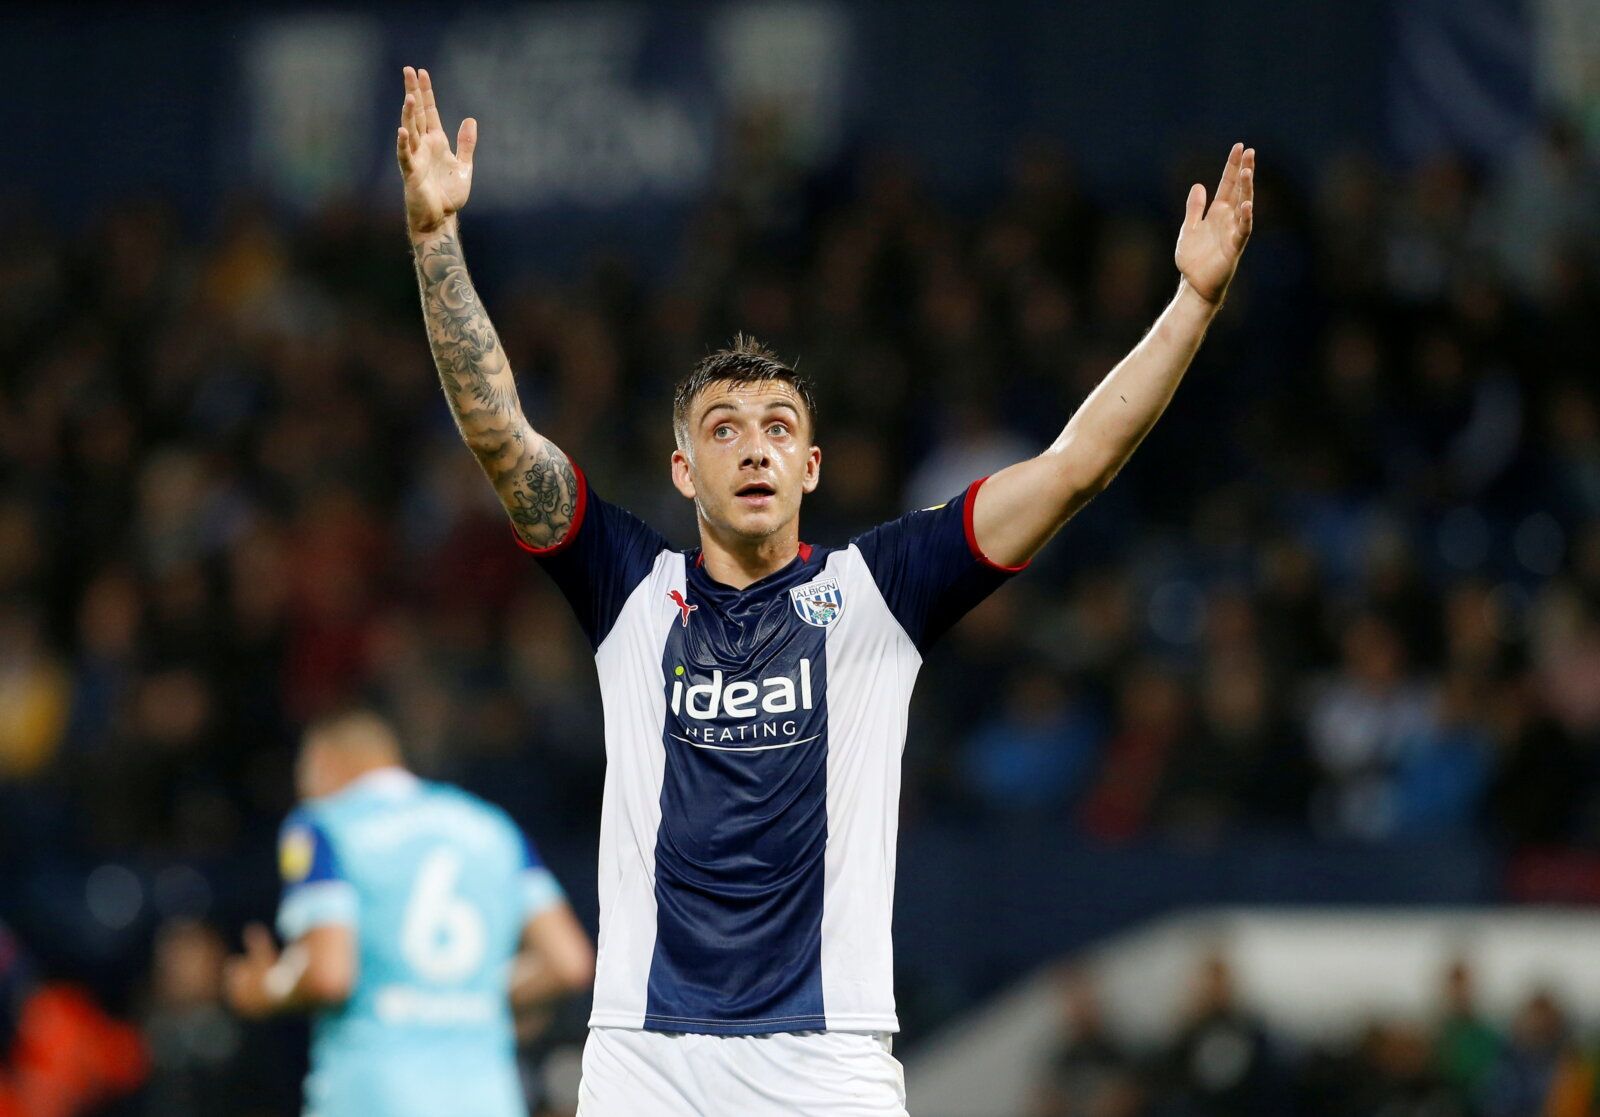 Soccer Football - Championship - West Bromwich Albion v Derby County - The Hawthorns, West Bromwich, Britain - September 14, 2021 West Bromwich Albion's Jordan Hugill reacts Action Images/Ed Sykes